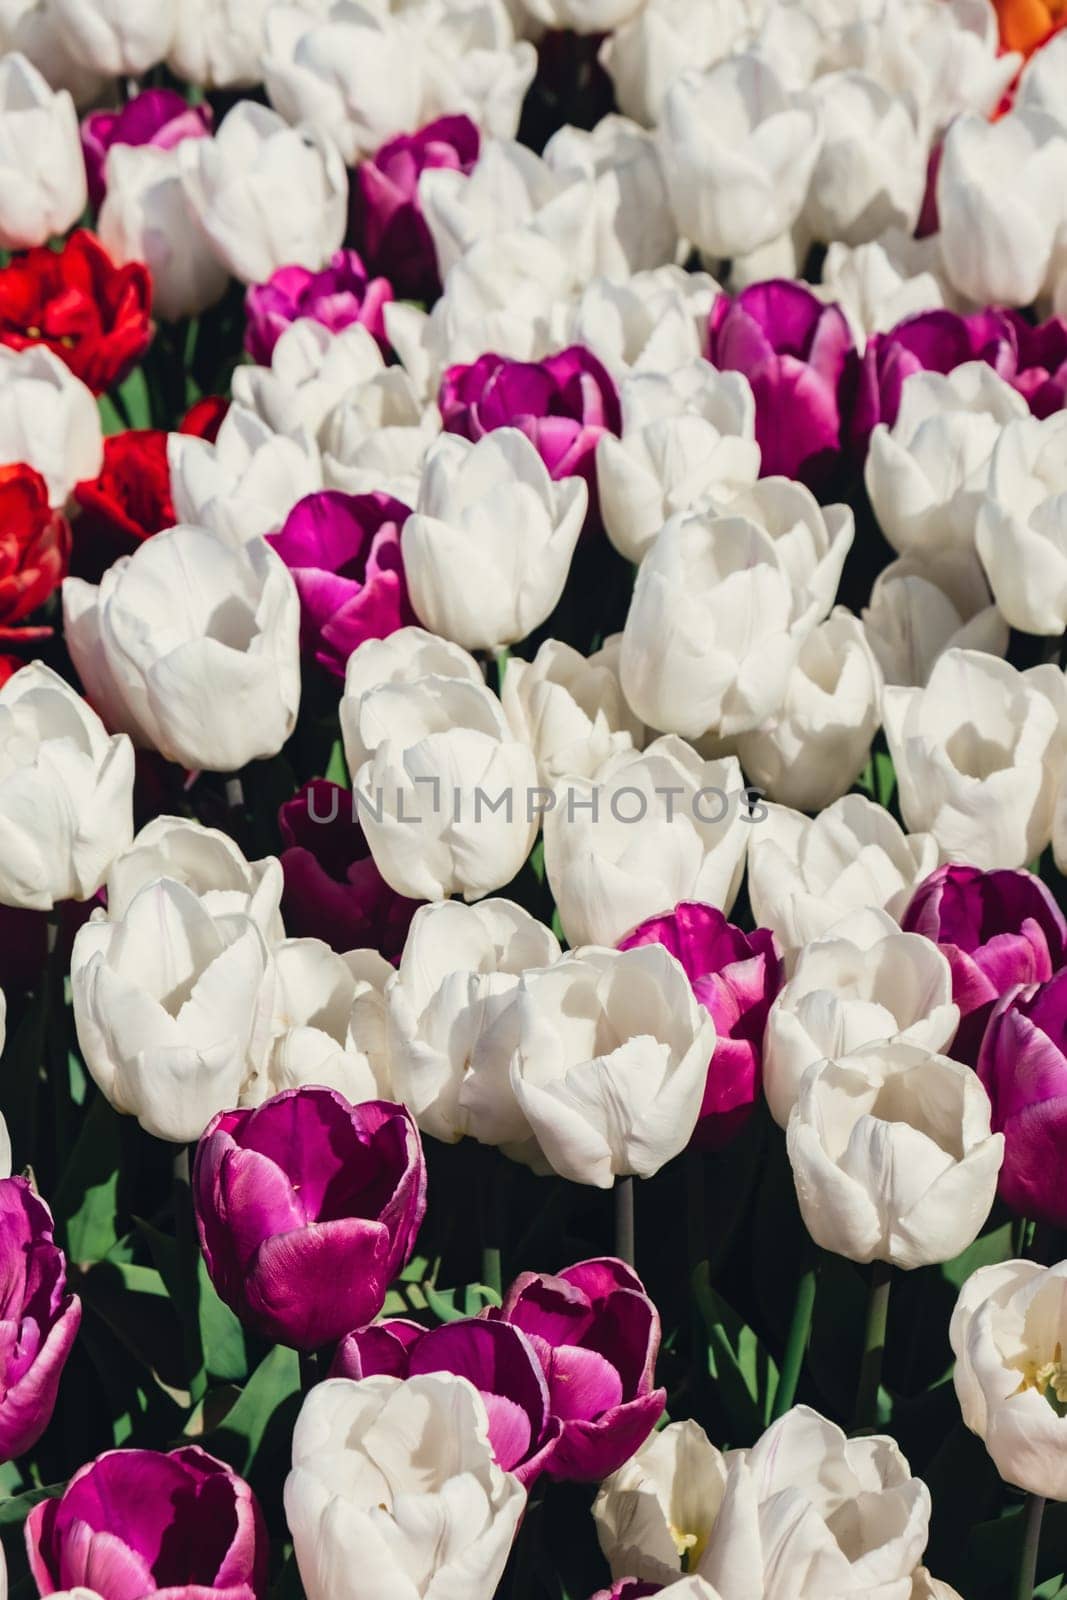 Blooming floral park in sunrise light. Colorful Tulip flowers blooming in the garden field landscape. Beautiful spring garden with many red tulips outdoors. Stripped tulips growing in flourish meadow sunny day Keukenhof. Natural floral pattern blowing in wind in spring